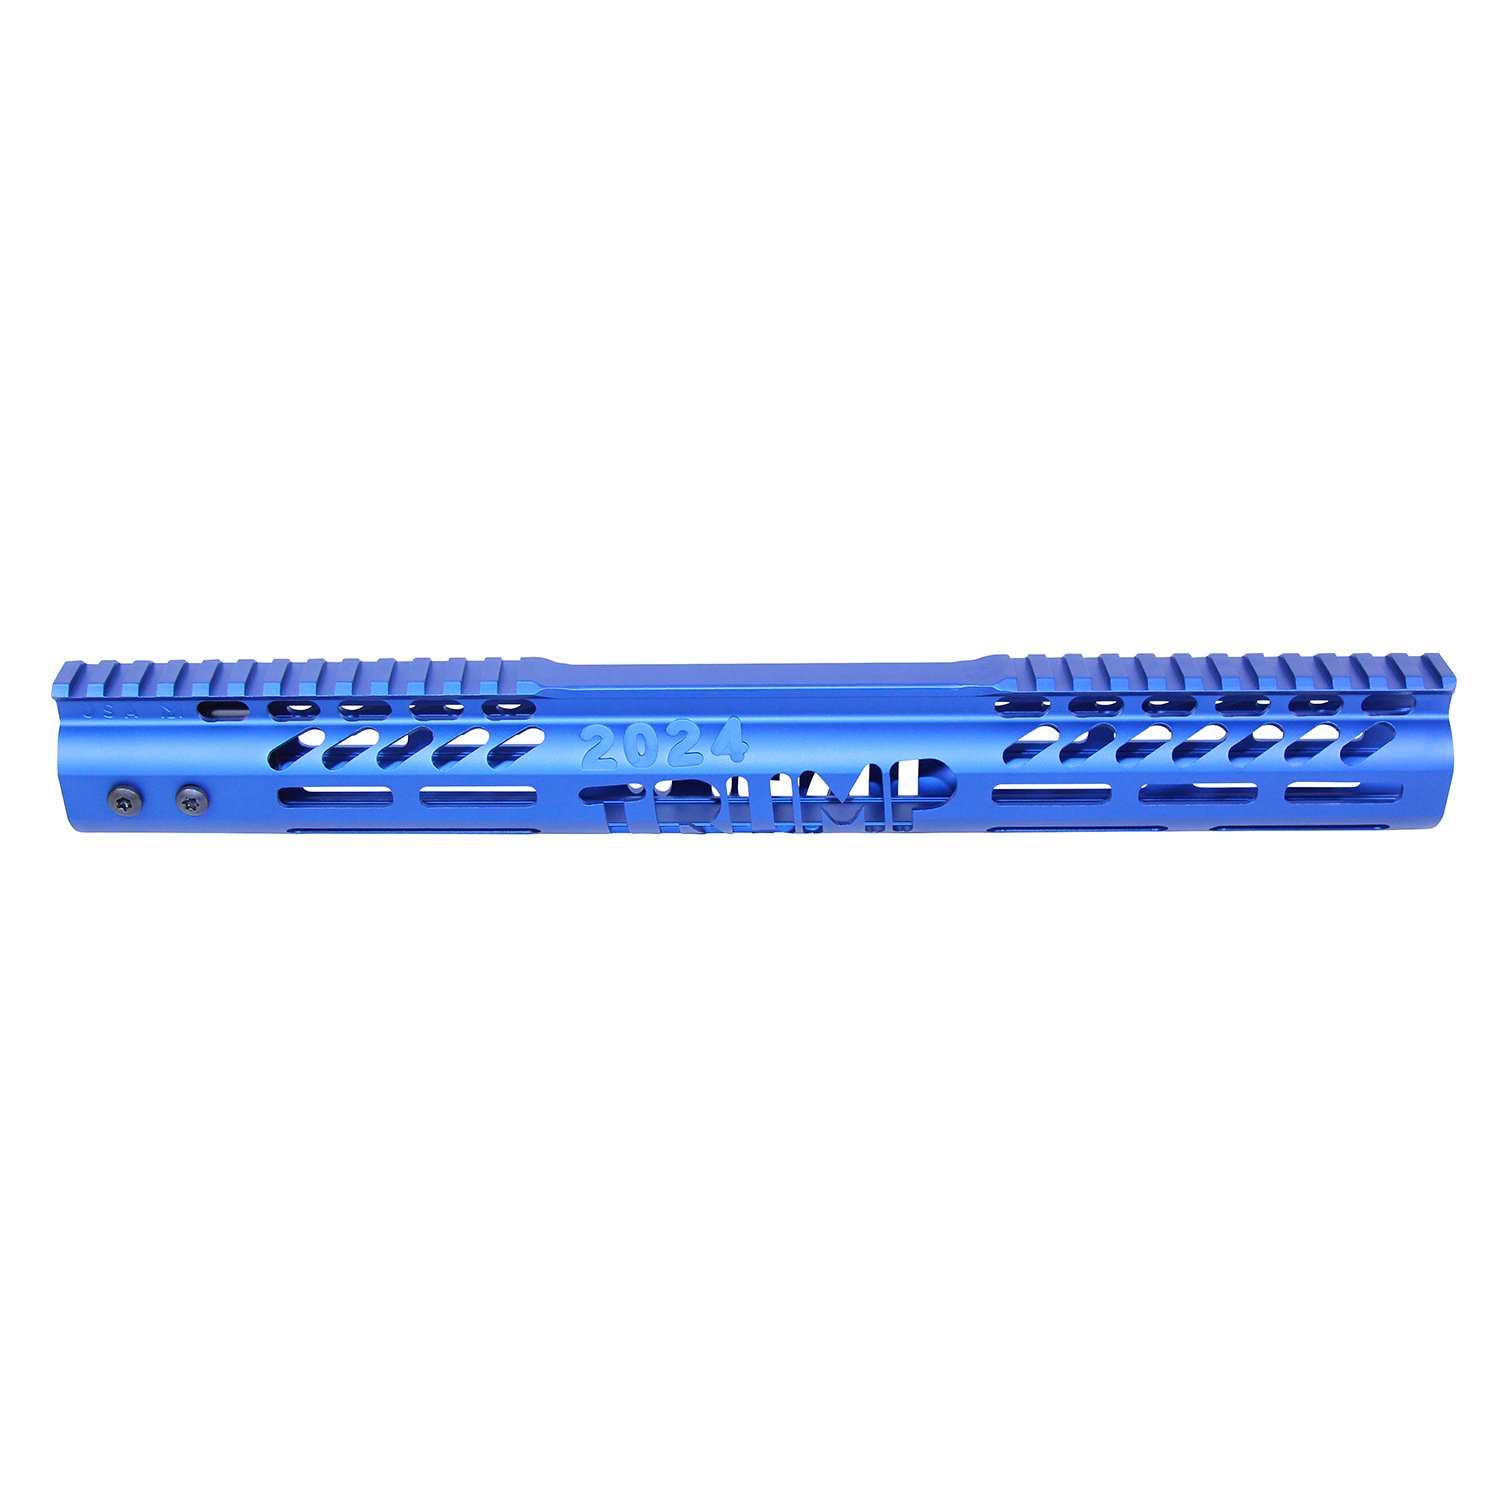 15" "Trump Series" Limited Edition M-LOK System Free Floating Handguard With Monolithic Top Rail (Anodized Blue)